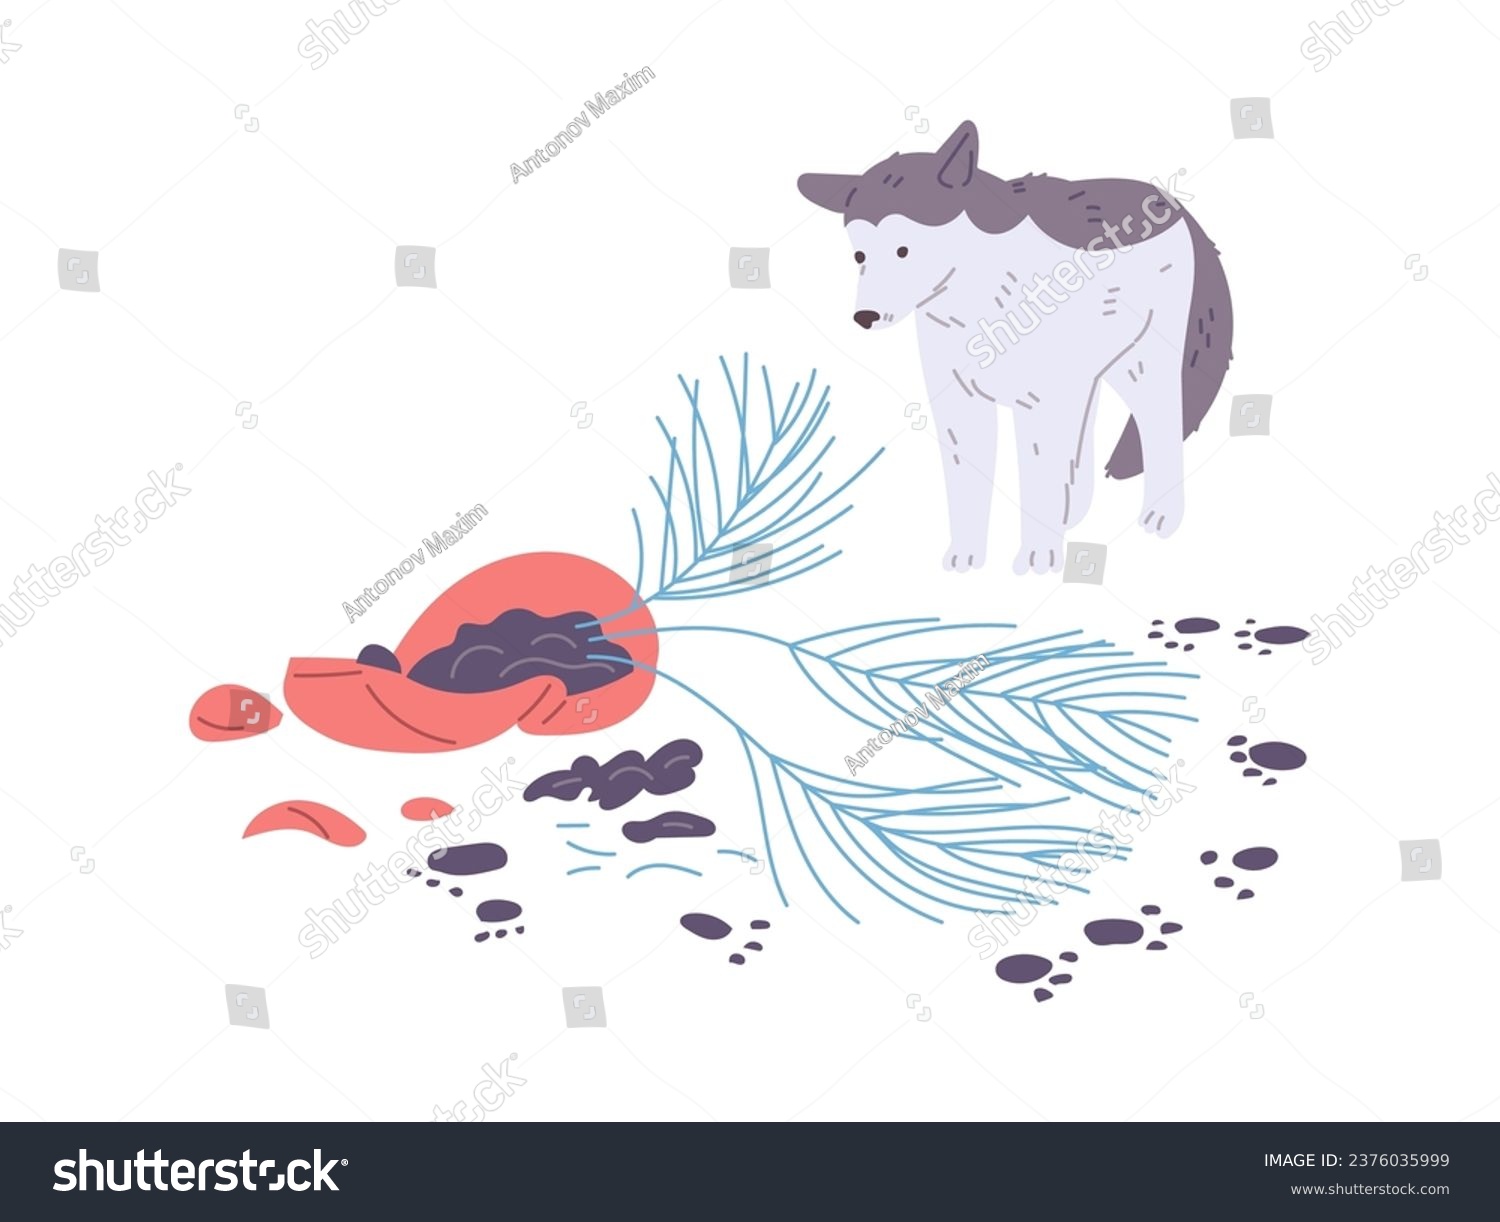 SVG of Dog, broken house plant pot and dirty paw prints vector illustration on white background. Disorder made by naughty dog. Pet mess and bad behavior concept. Canine animal knock over, damage flower pot. svg